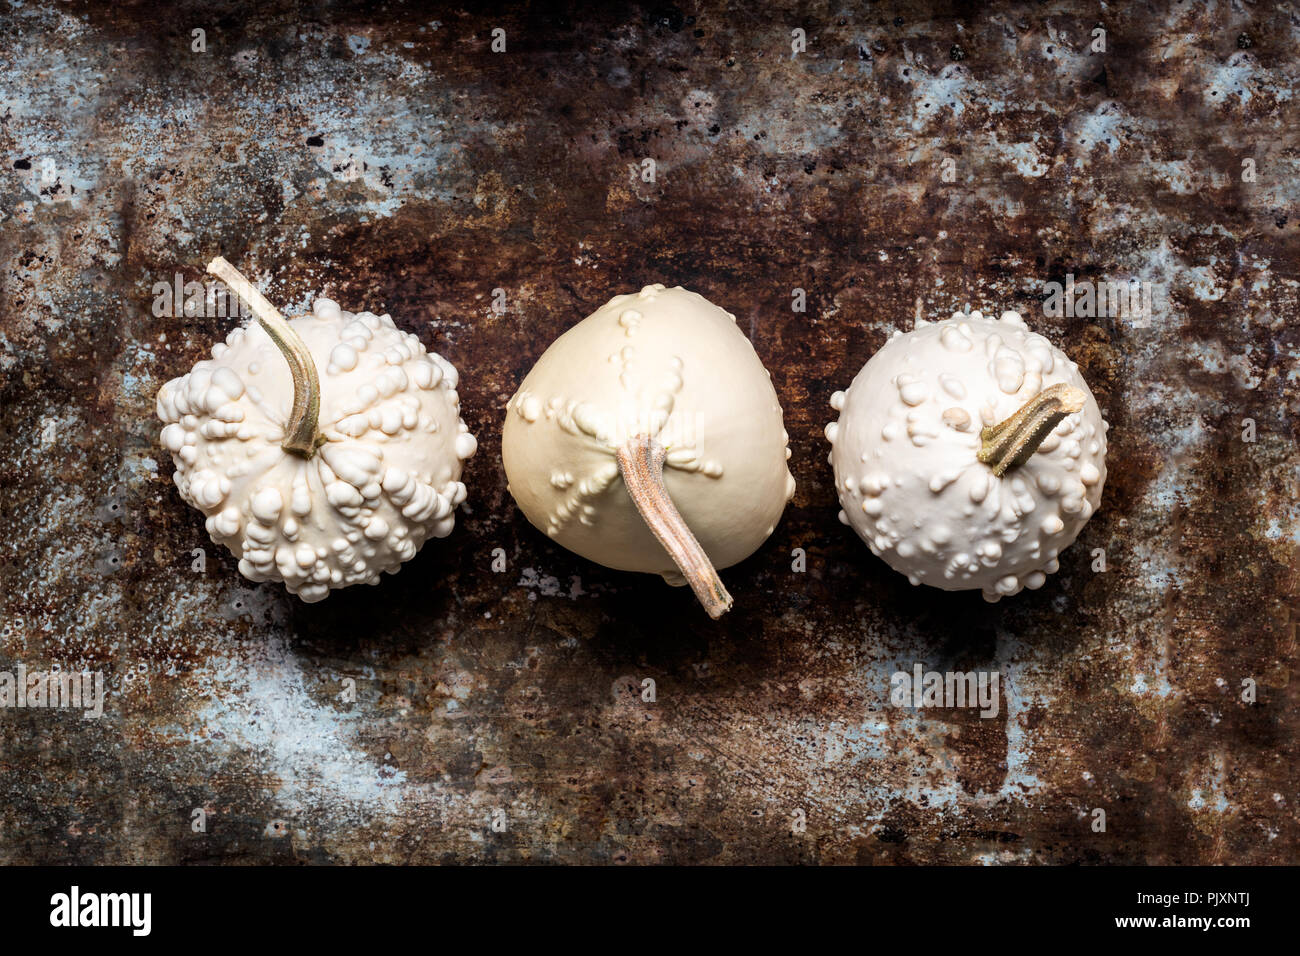 Happy Thanksgiving Banner. Three white pumpkins on rustic metal background with copy space. Autumn Harvest and Holiday minimal still life. Stock Photo